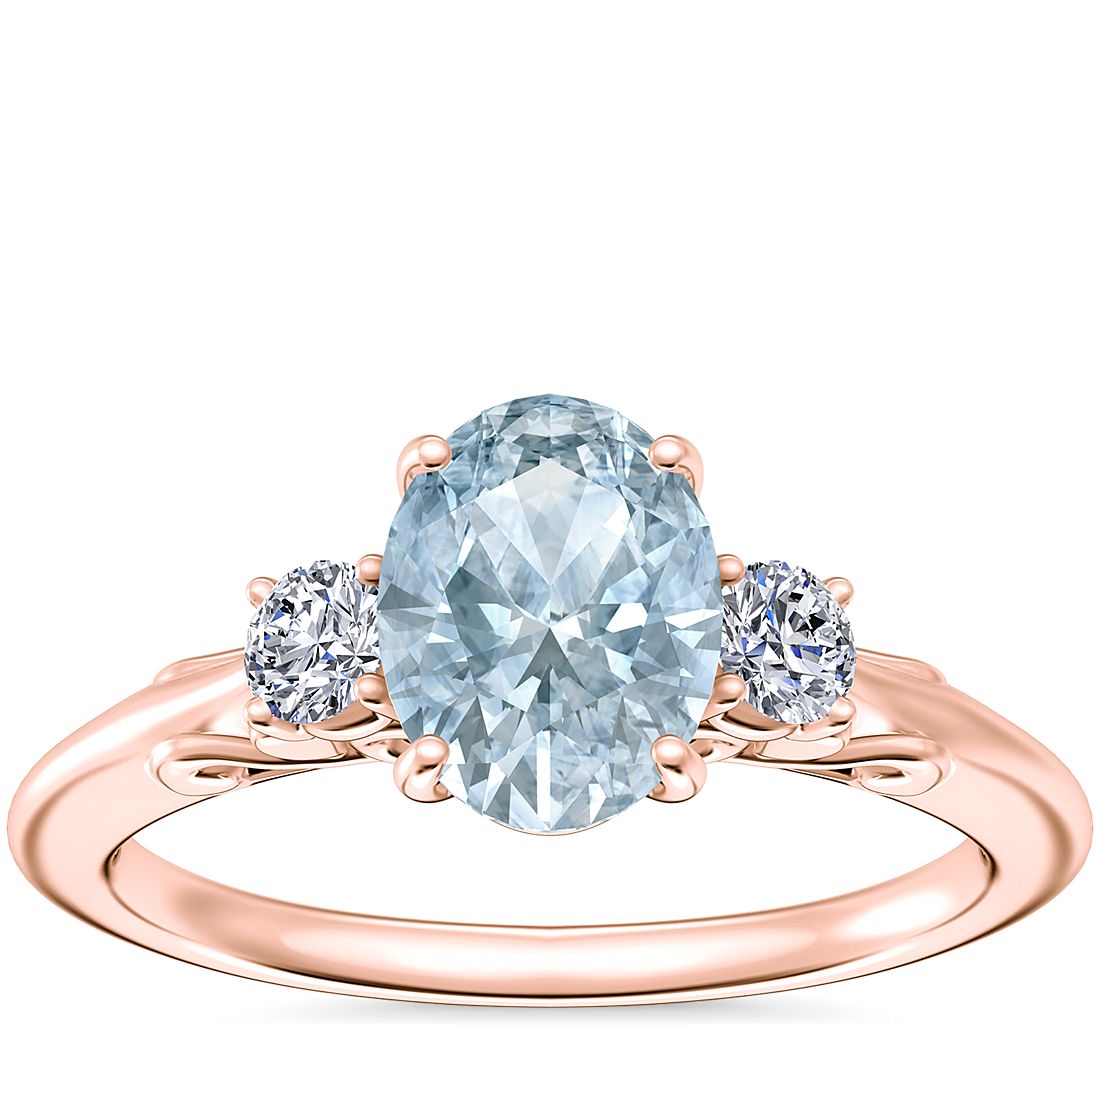 Vintage Three Stone Engagement Ring with Oval Aquamarine in 18k Rose Gold (8x6mm)